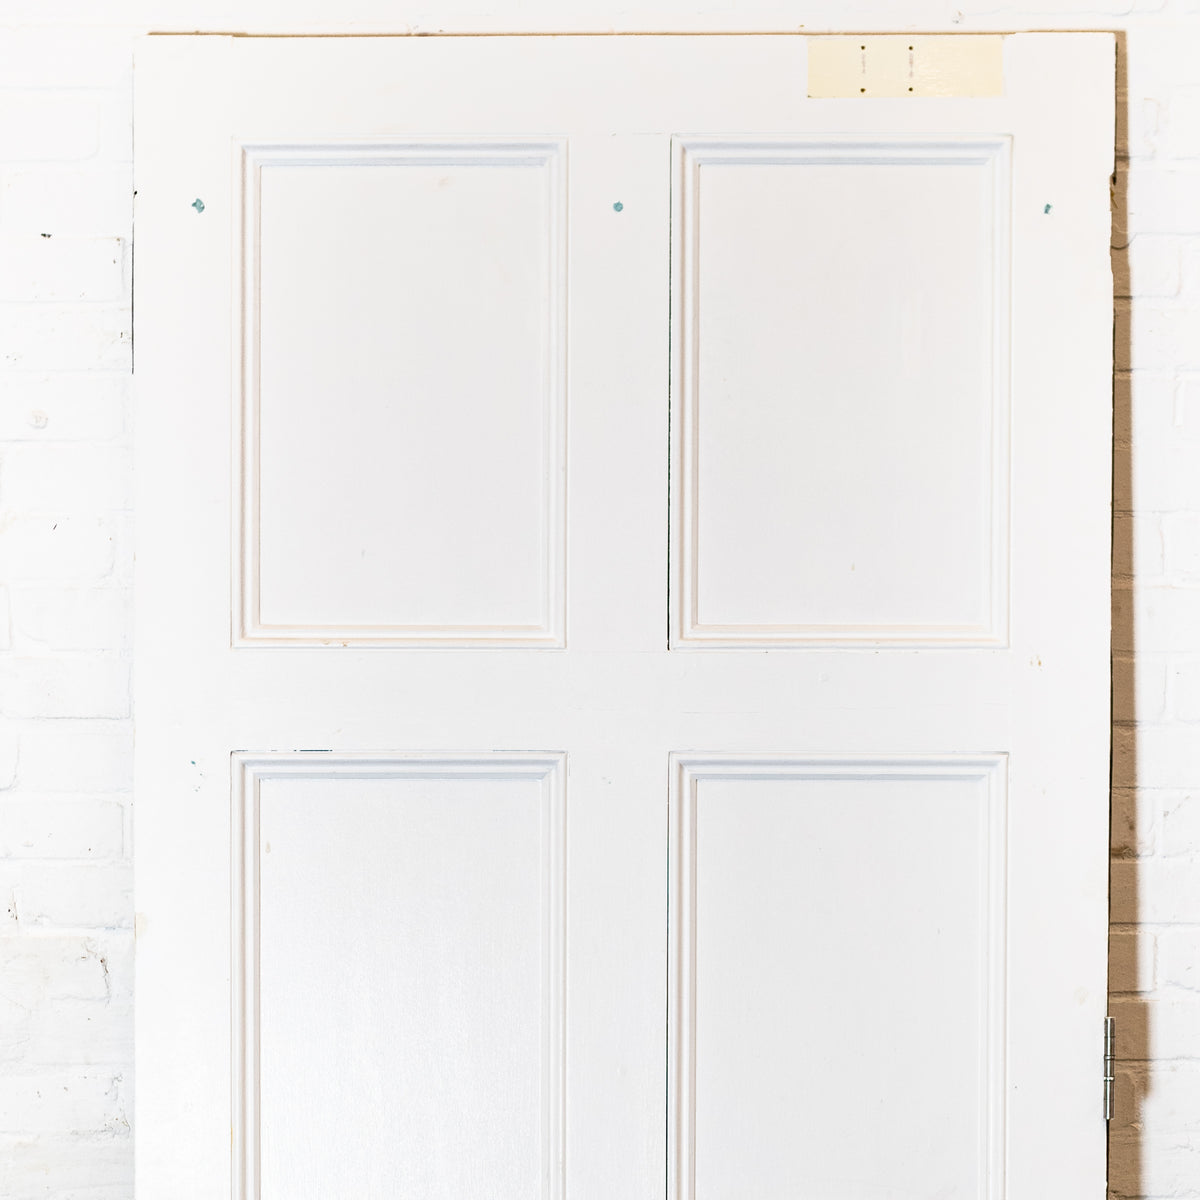 Large Georgian Style Solid Pine Panelled Door - 225cm x 103.5cm | The Architectural Forum